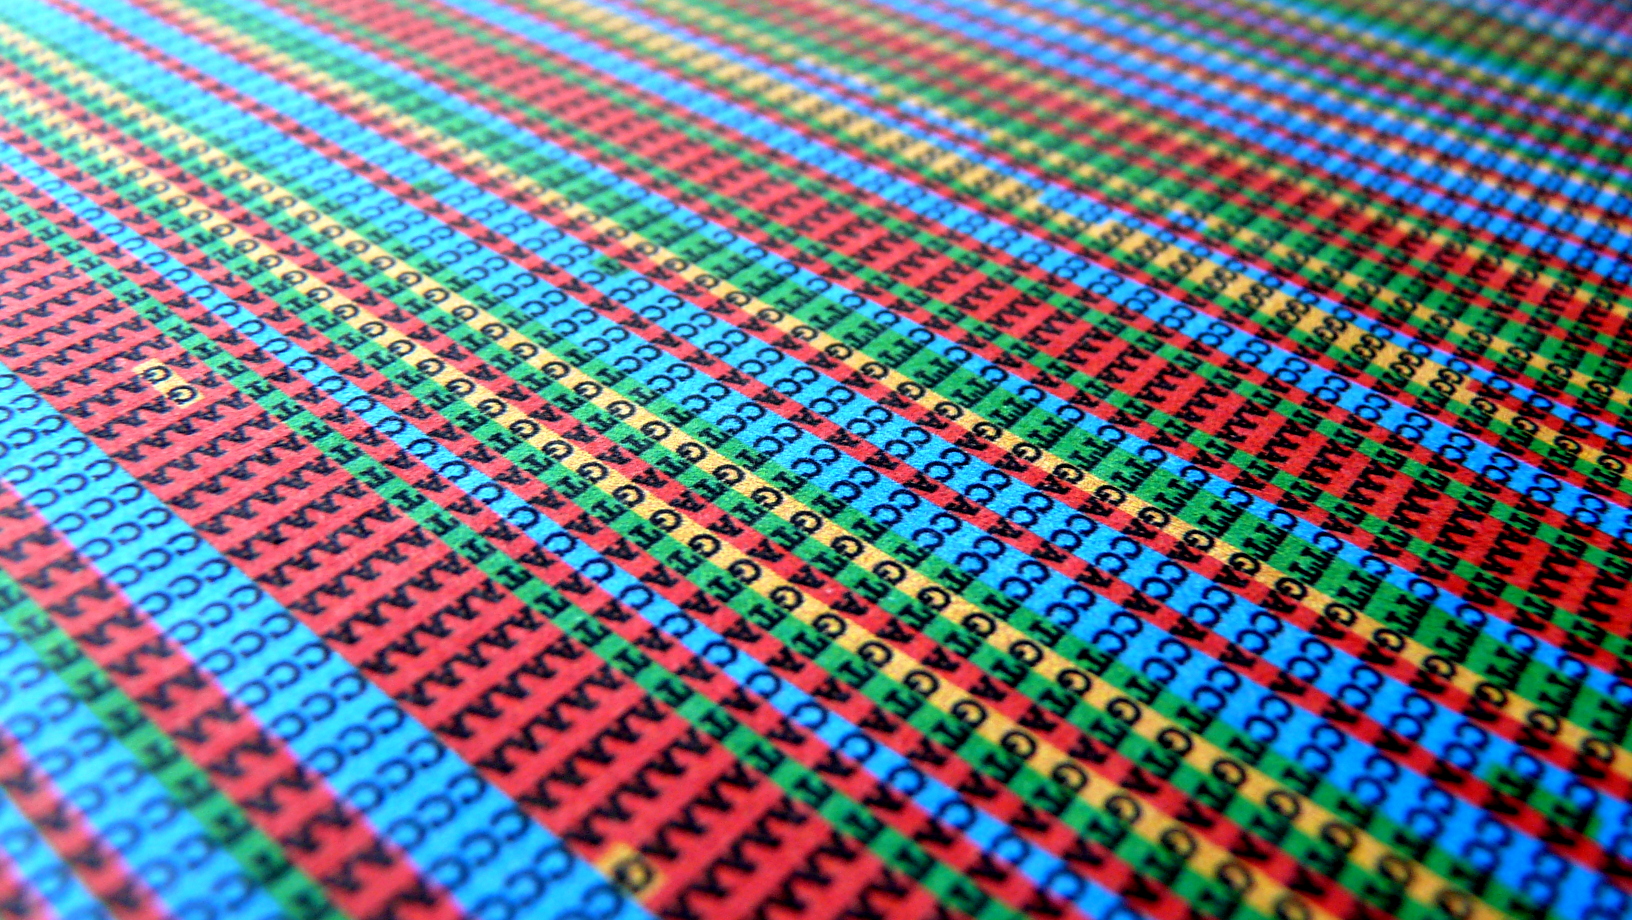 A colorful DNA sequencing map (Shaury Nash, Creative Commons via Flikr)